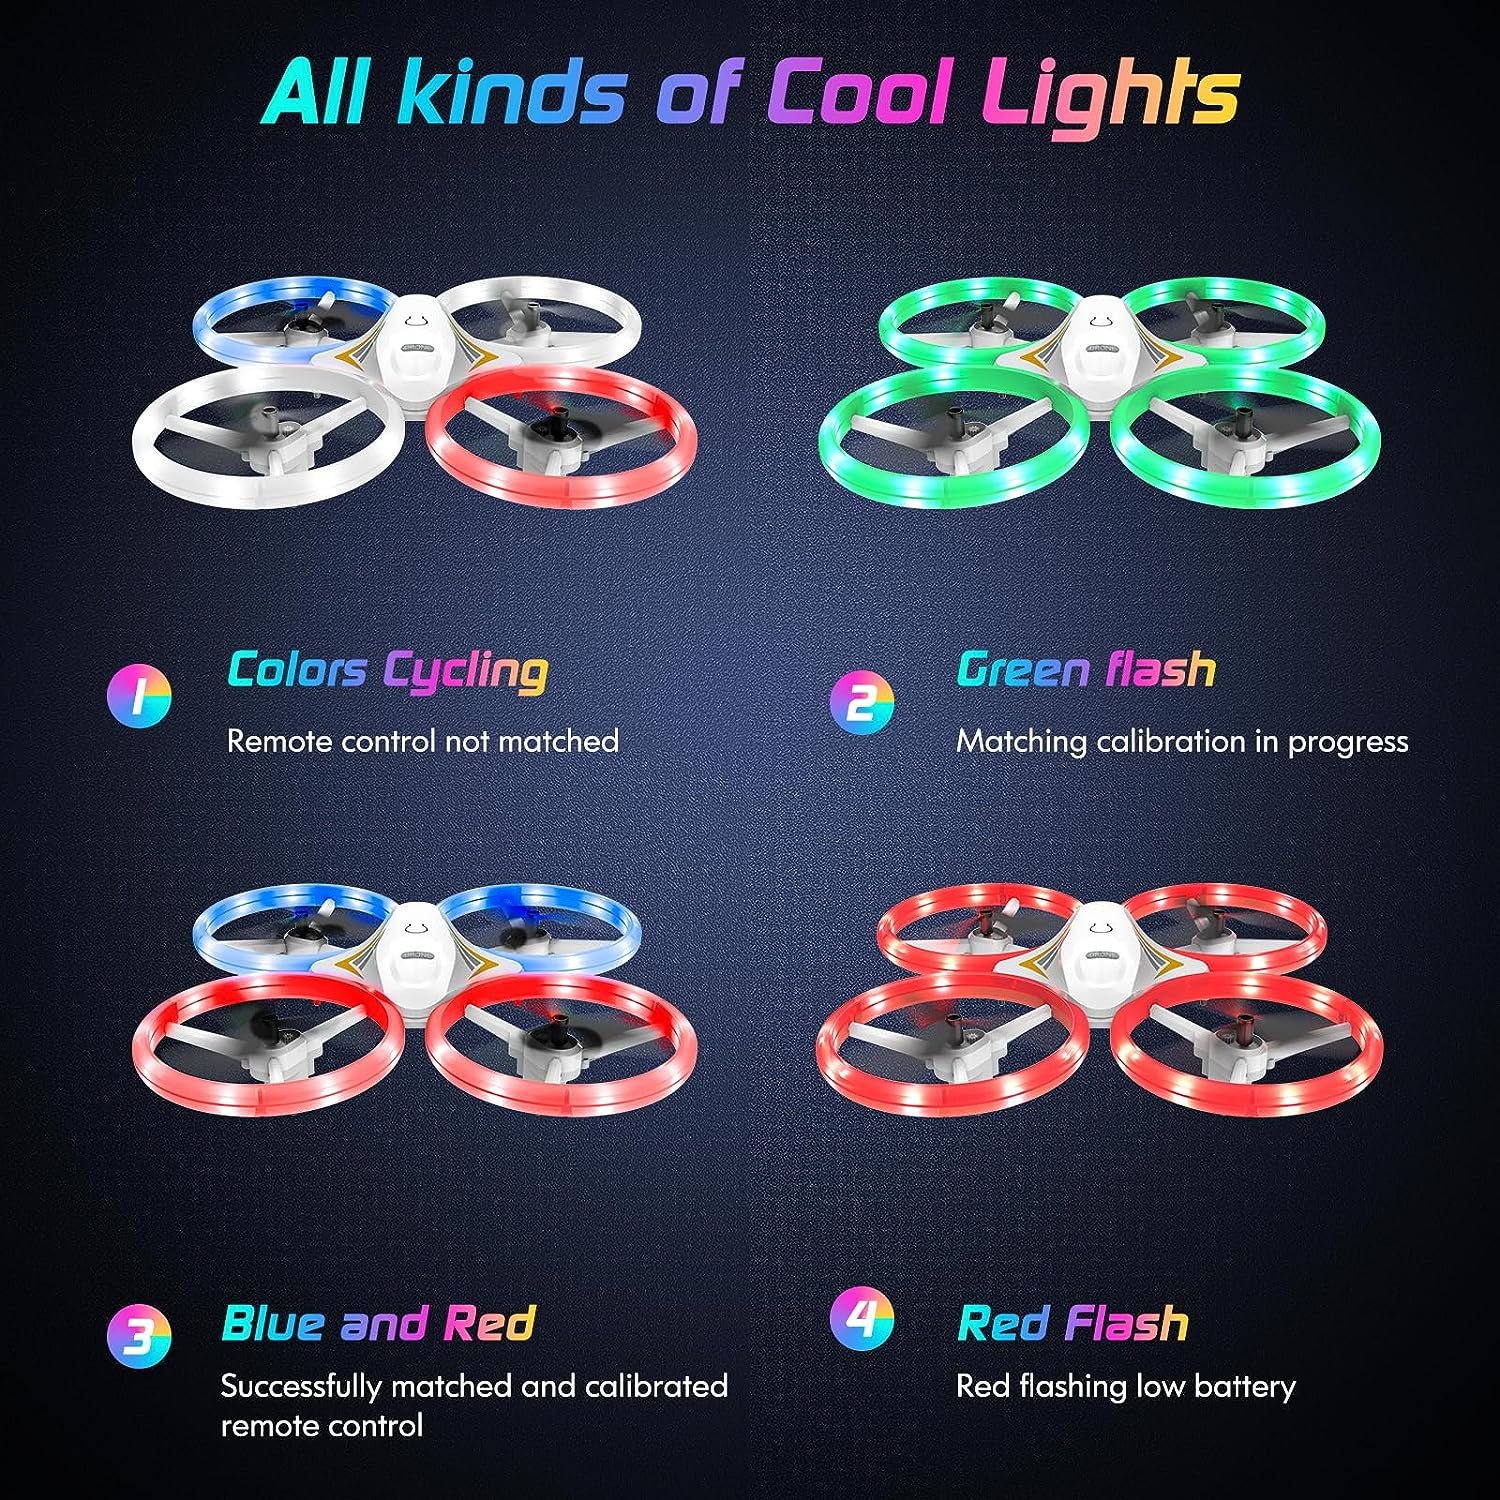 DyineeFy Mini Drone for Kids, Small Colorful Led Quadcopter with Altitude Hold, Headless Mode, 360° flip, and Auto Return Home, RC Drone Easy for Beginner Flying, Kids' Gift Toy for Boys and Girls